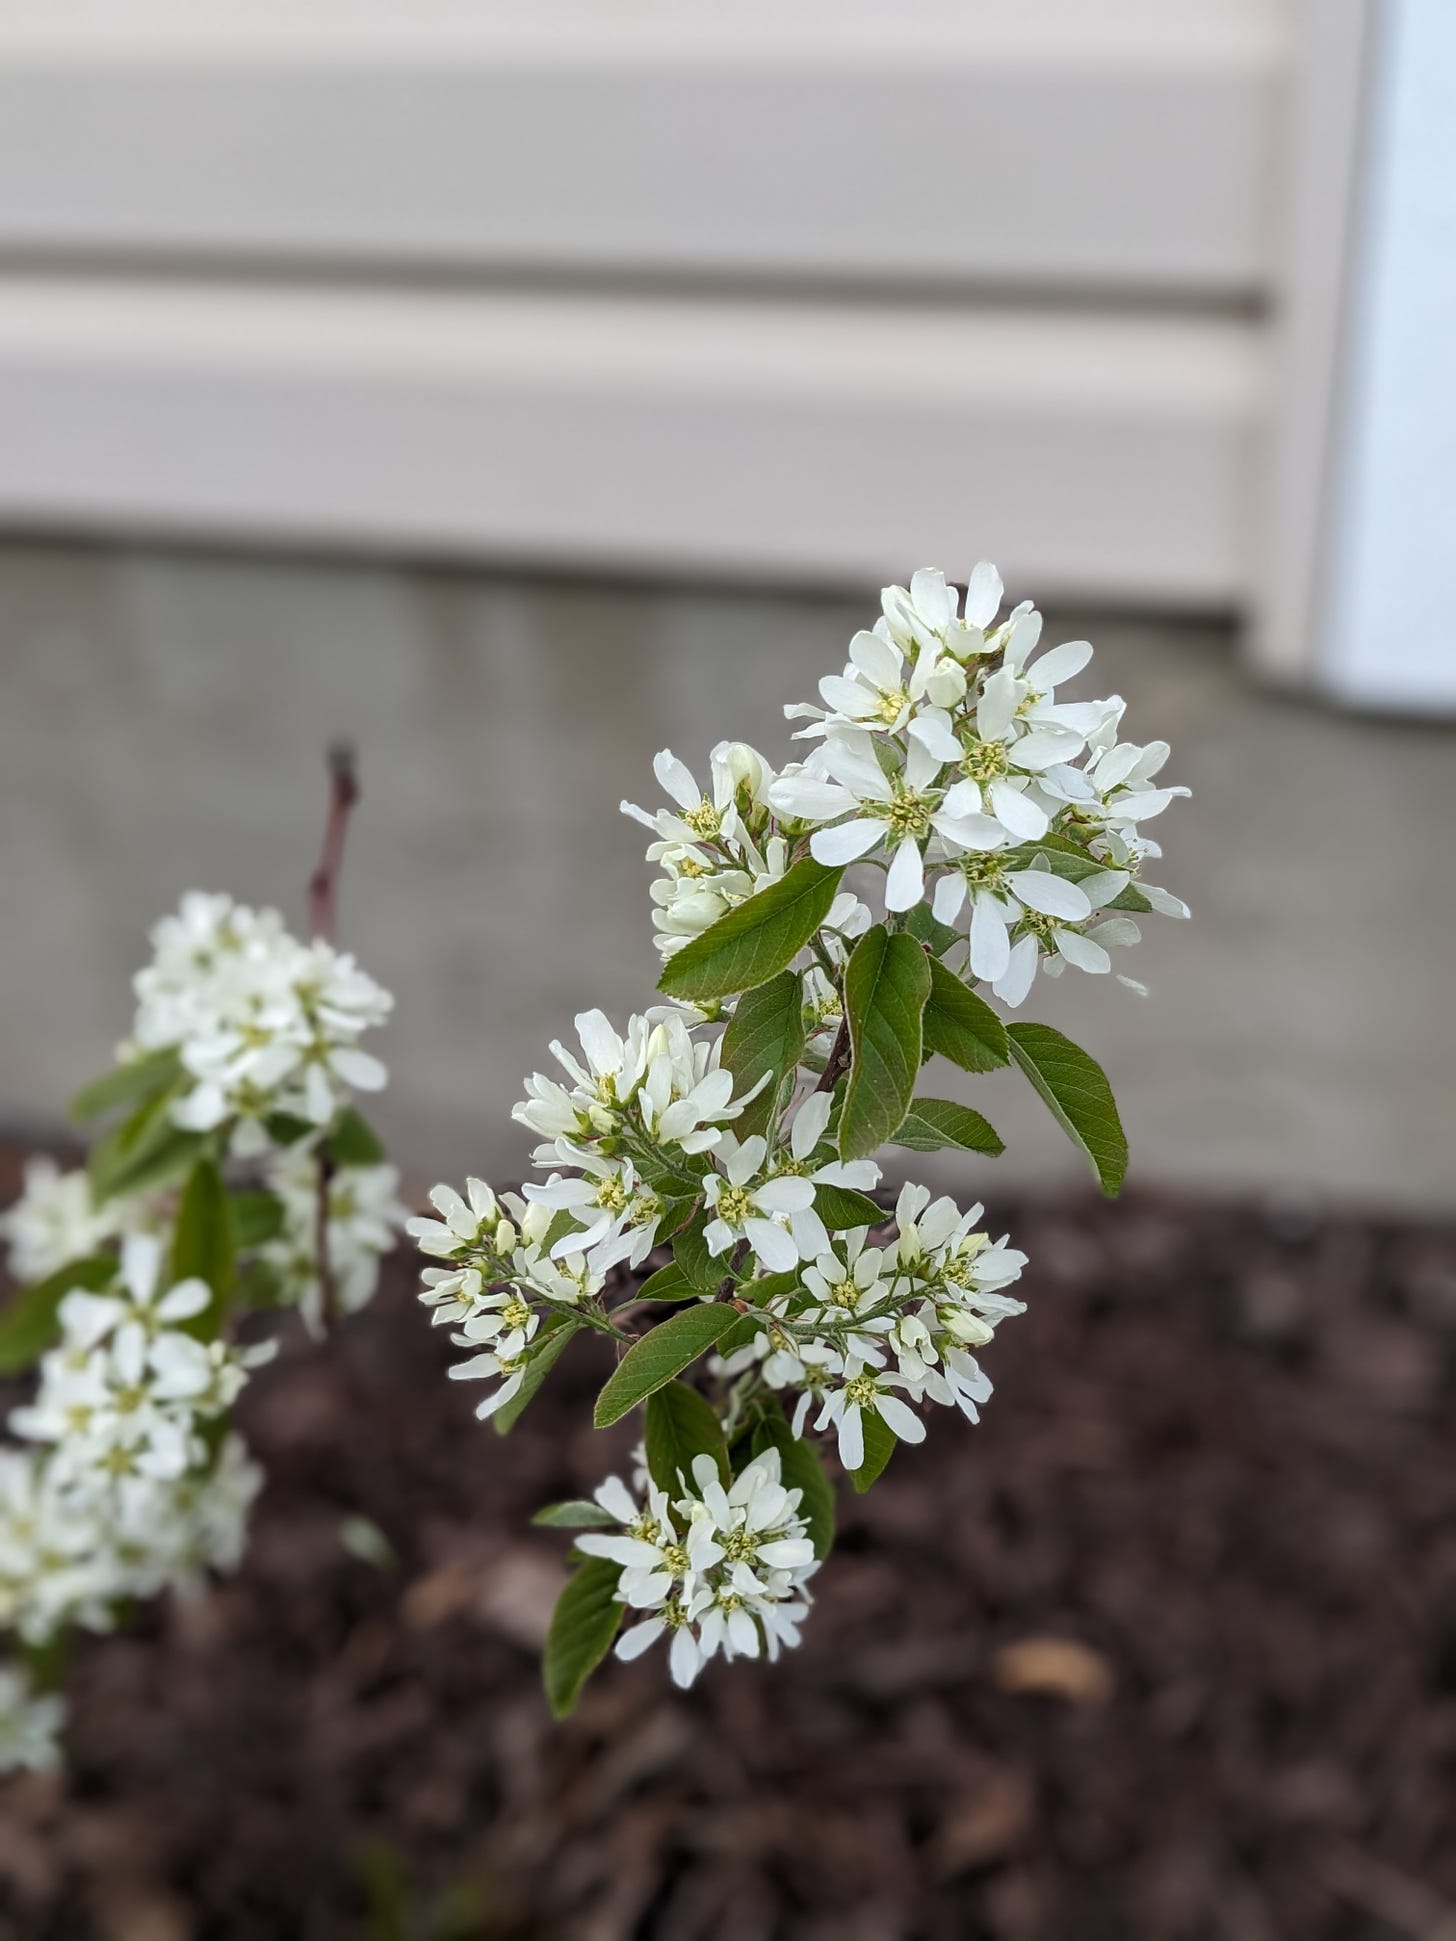 a different close-up photo of green leaves with white flowers. this plant (saskatoon) has long branches with leaves toward the ends. the mulch beneath, in the blurry background, is dark brown